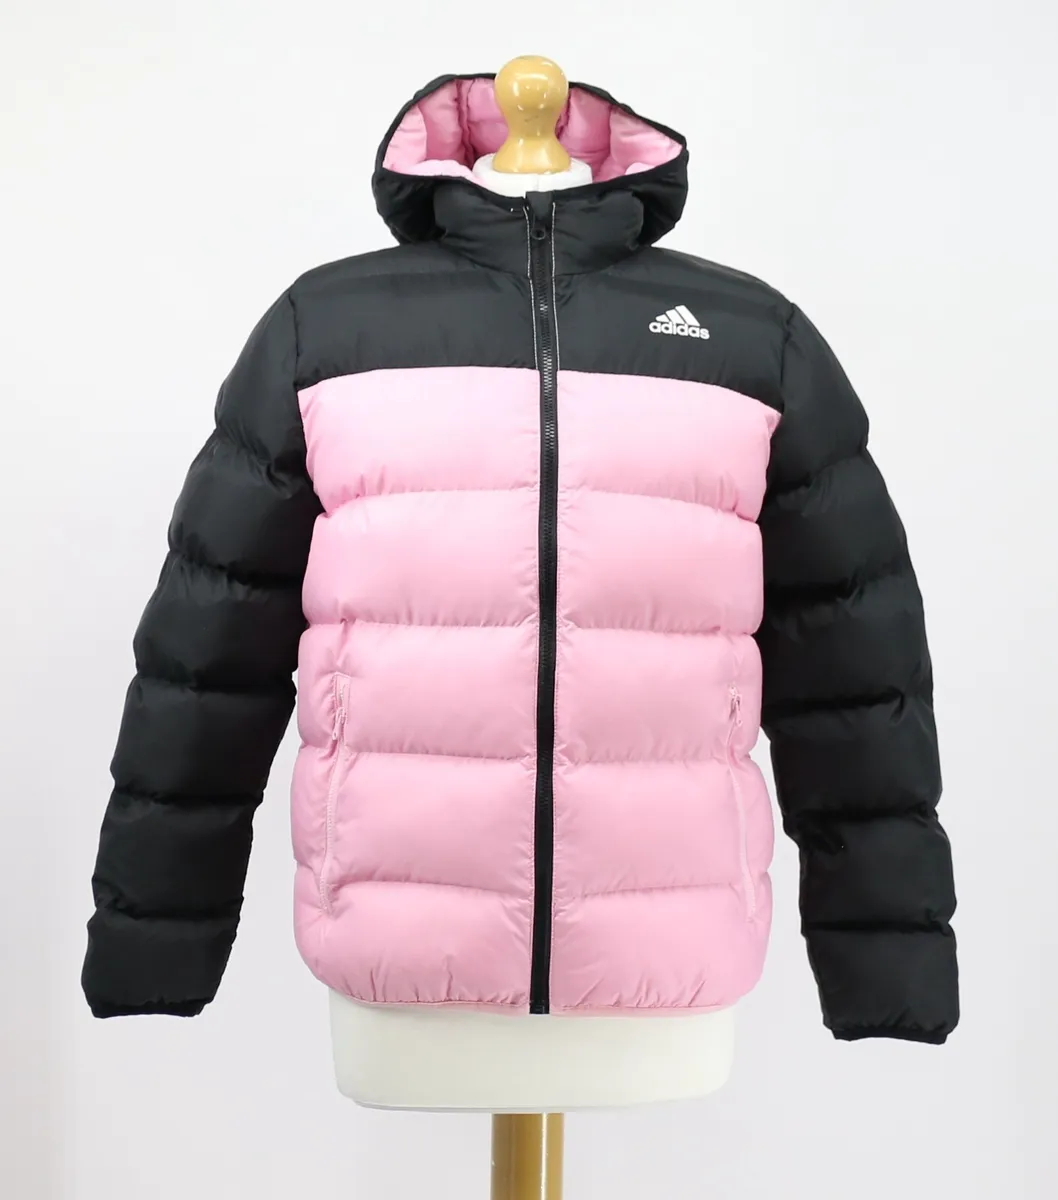 COLOUR BLOCK GIRLS | PINK HOODED RRP eBay ADIDAS JACKET £60 AD CHILDRENS PADDED PUFFER